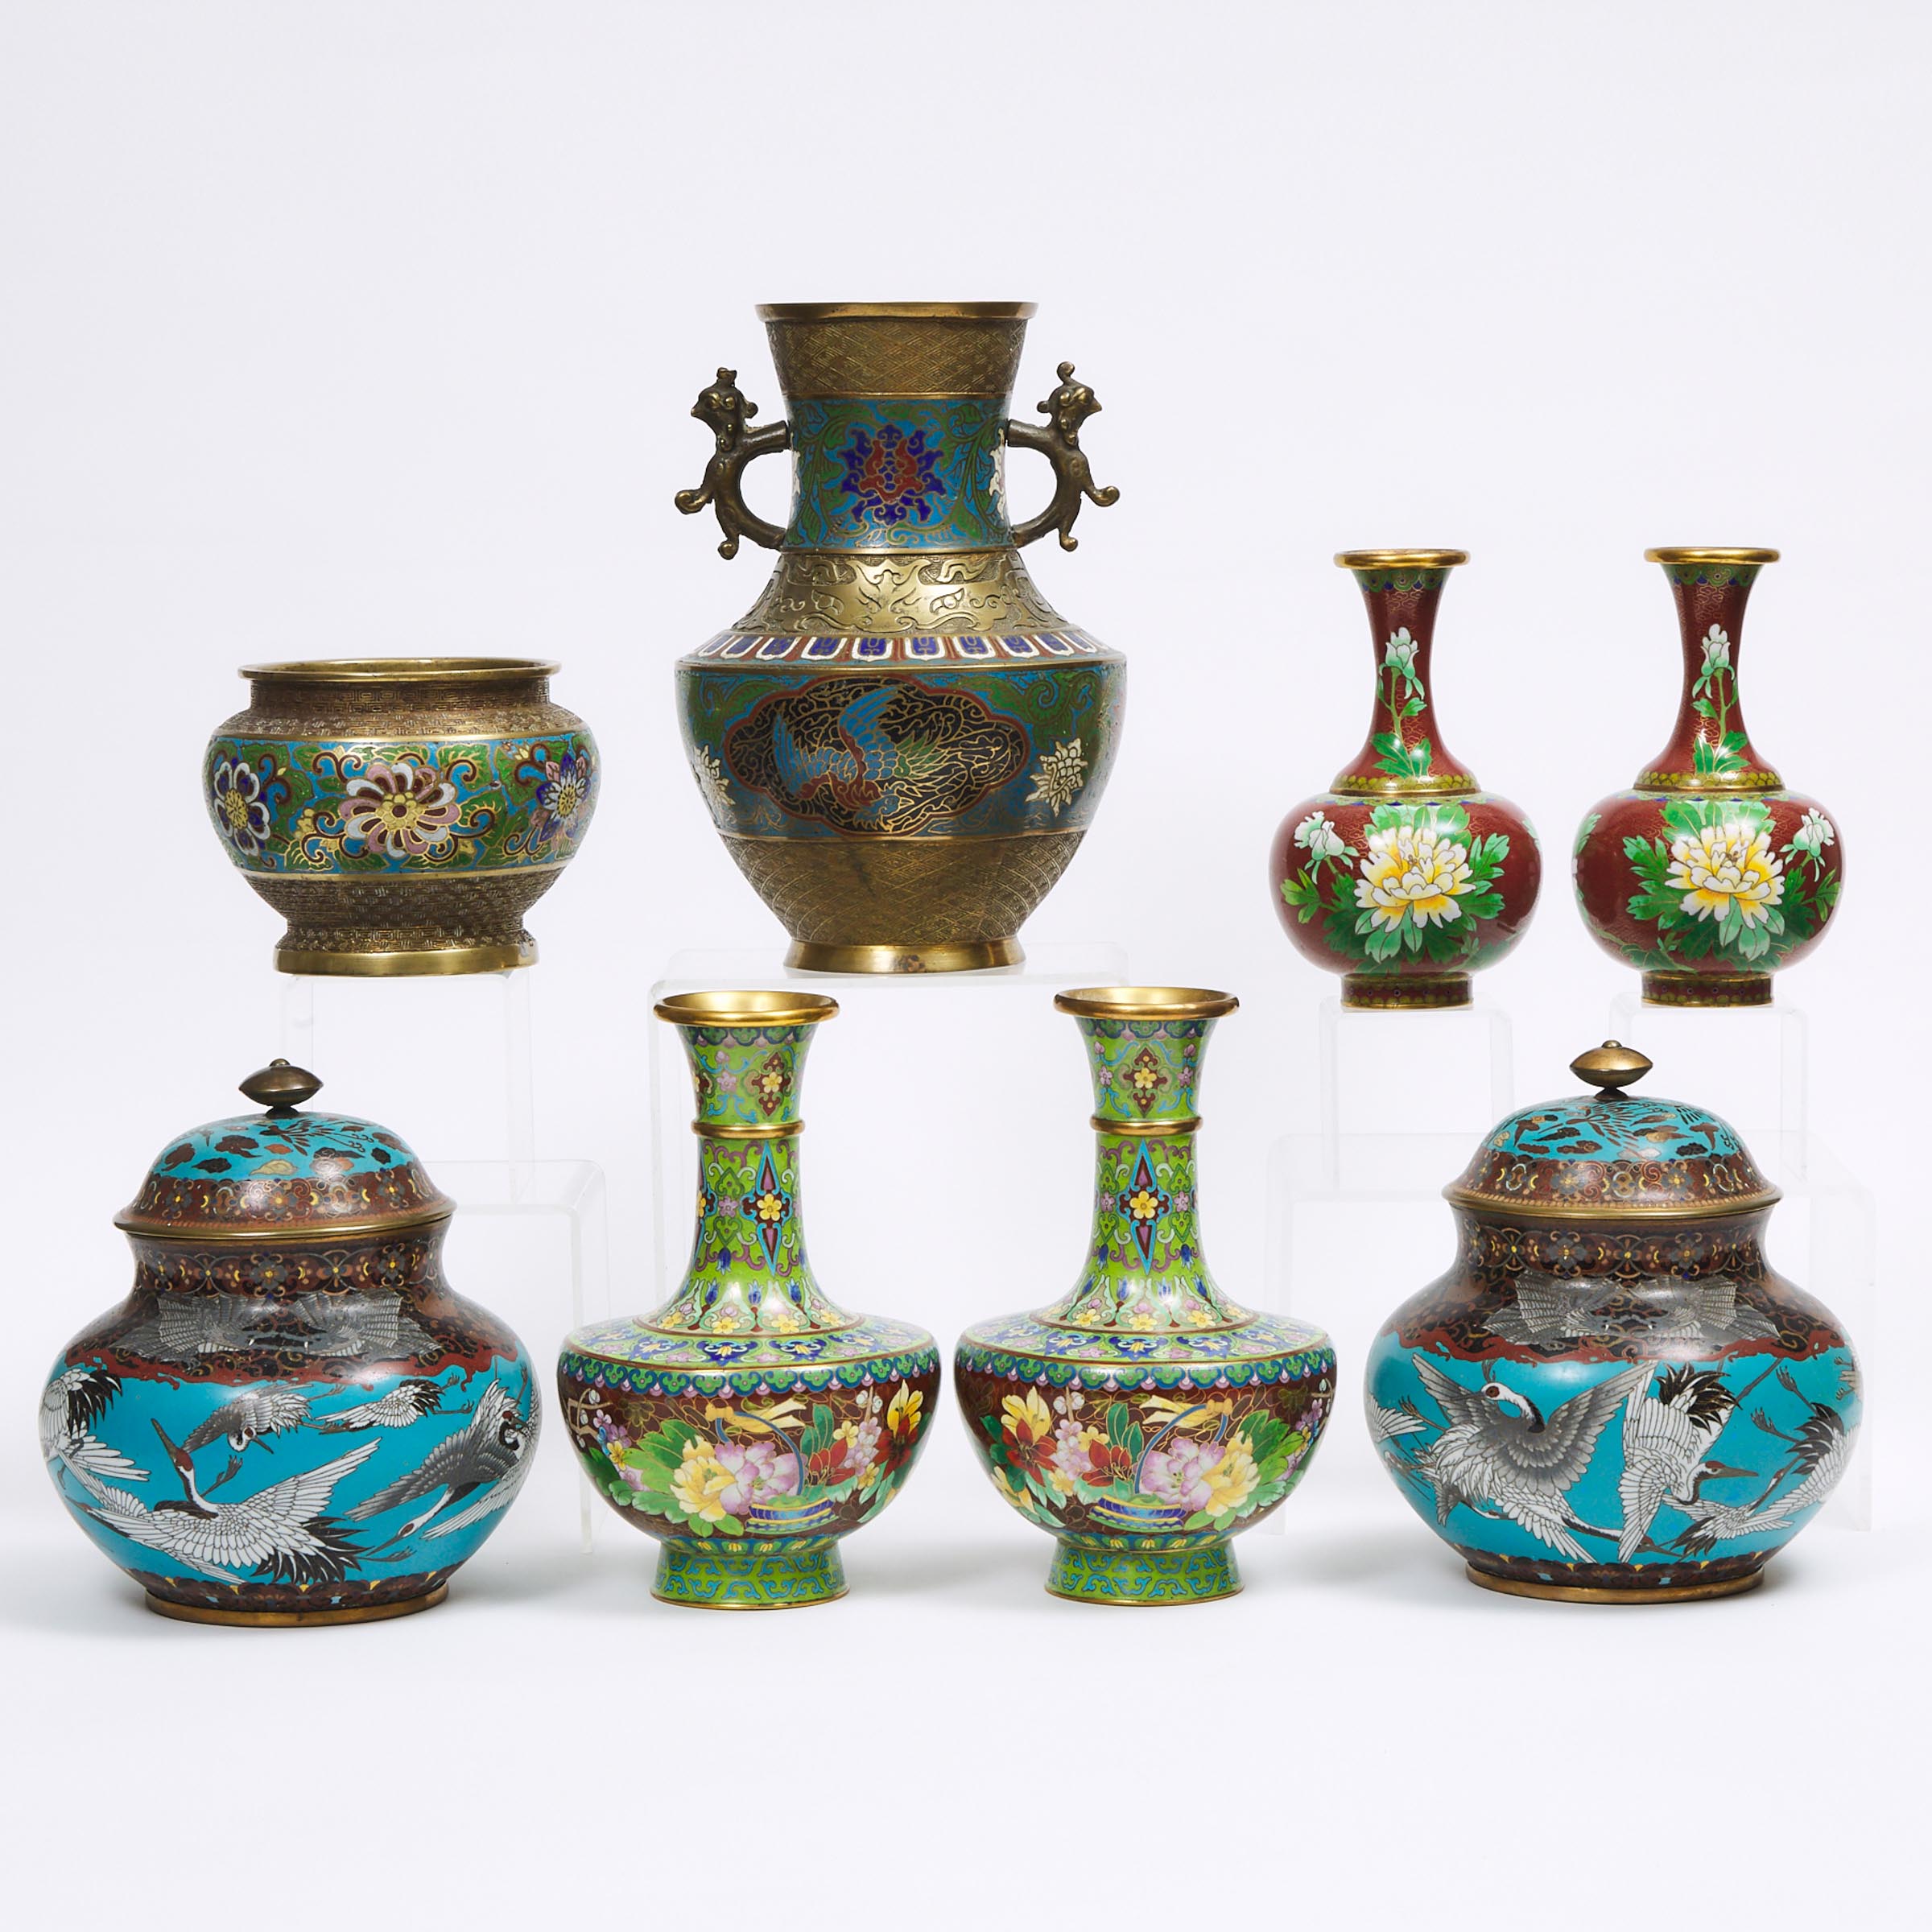 A Group of Eight Cloisonné Vessels